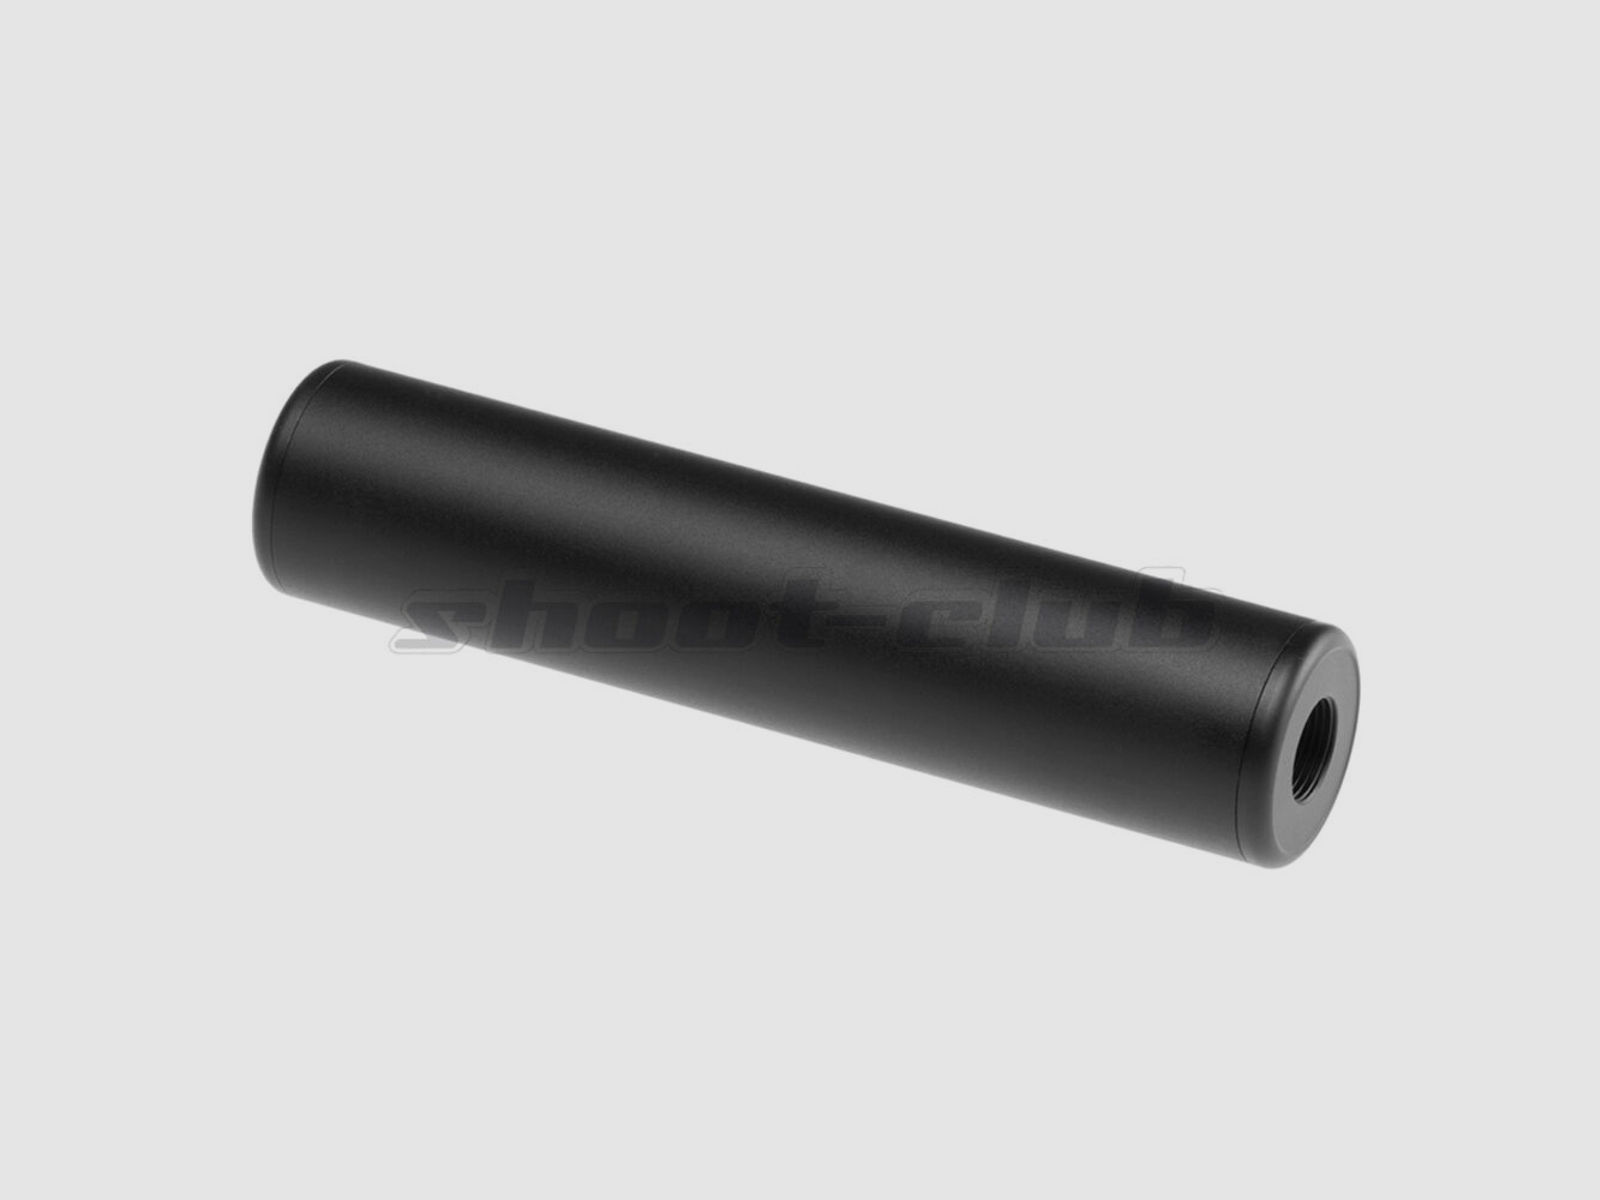 Pirate Arms	 Pirate Arms 145mm LW Silencer CW/CCW